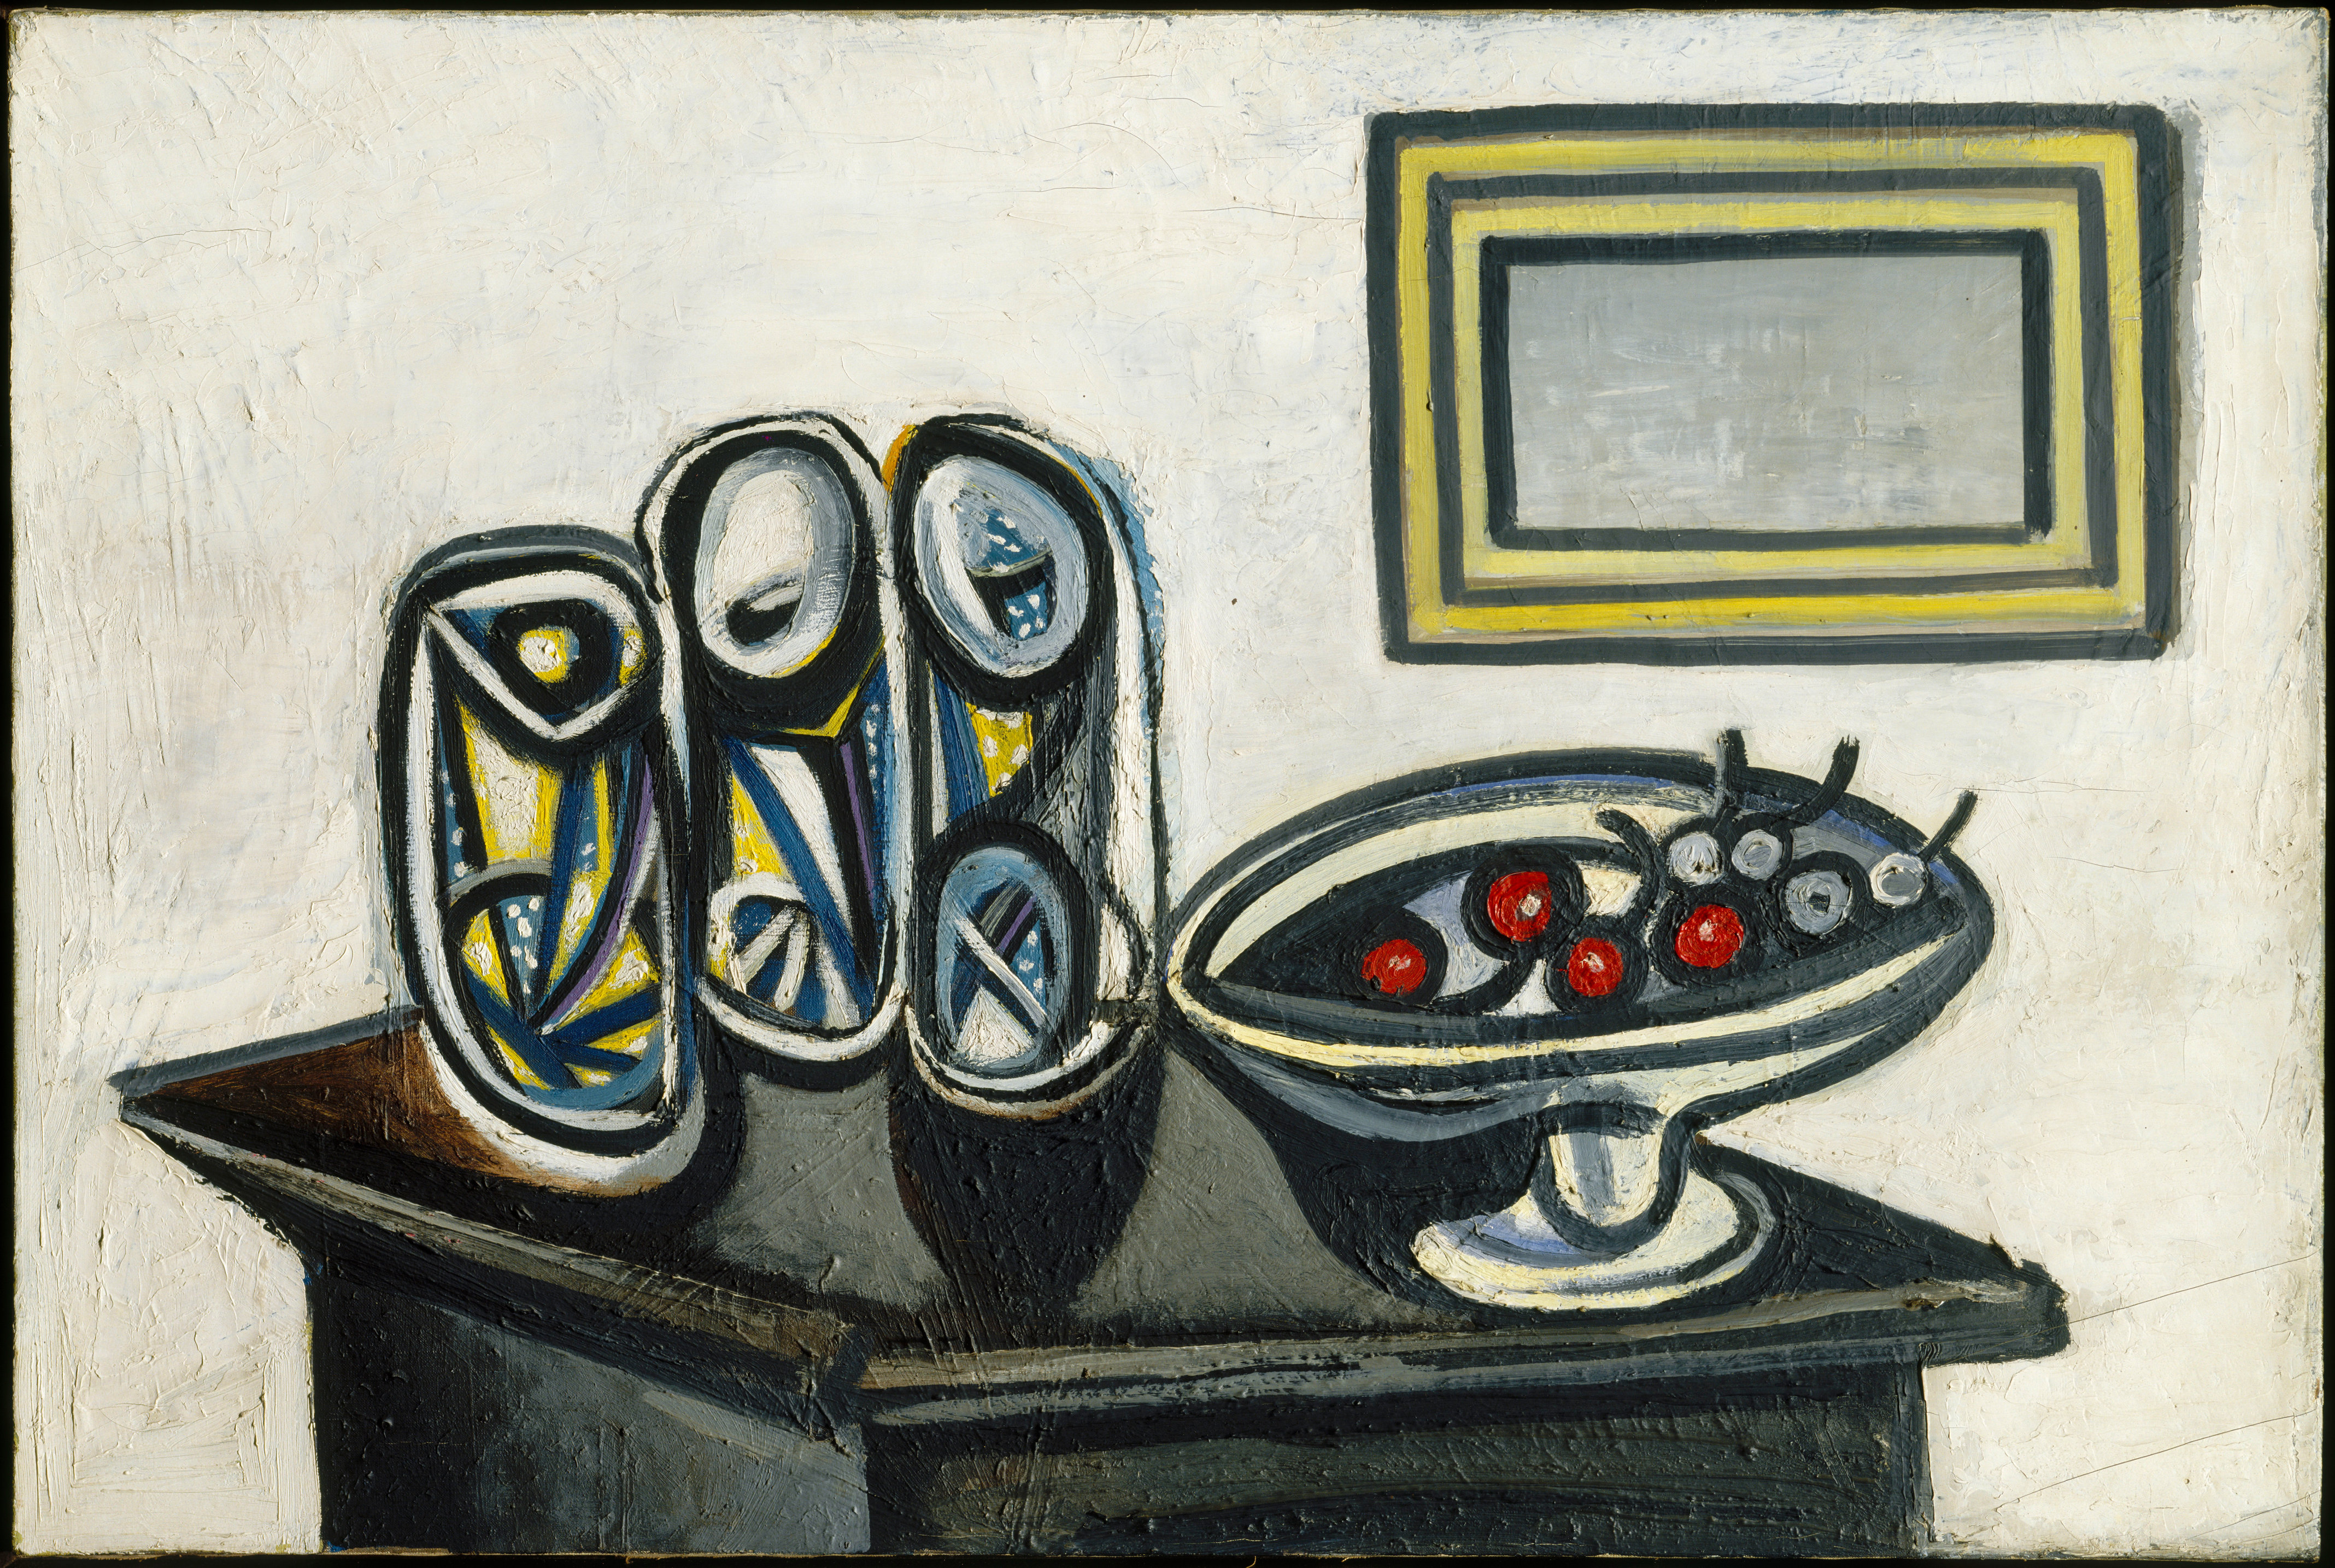 A photo of Picasso's painting 'Still life with Cherries' (courtesy of the Picasso Museum)